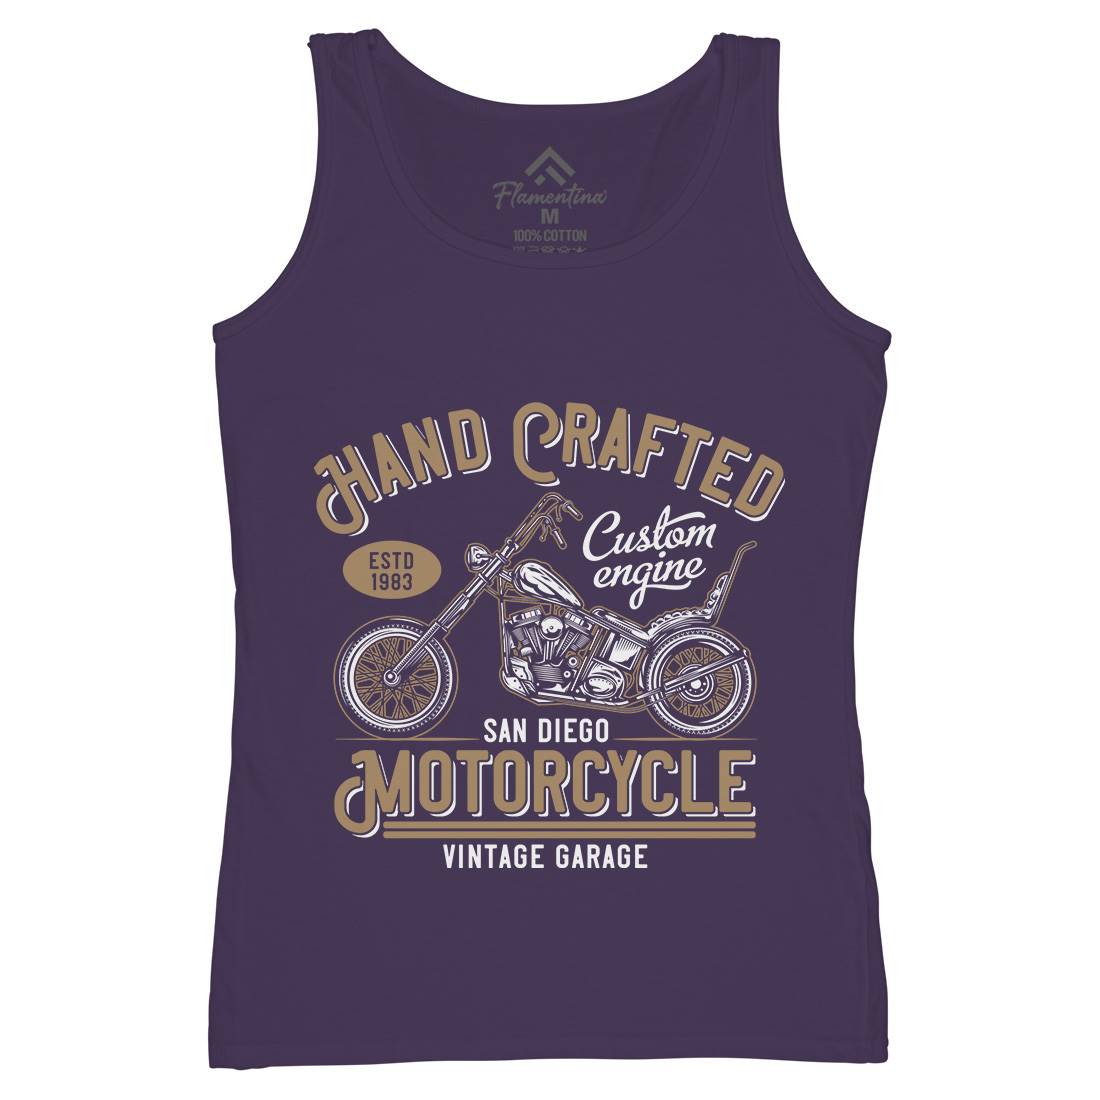 Hand Crafted Womens Organic Tank Top Vest Motorcycles B838